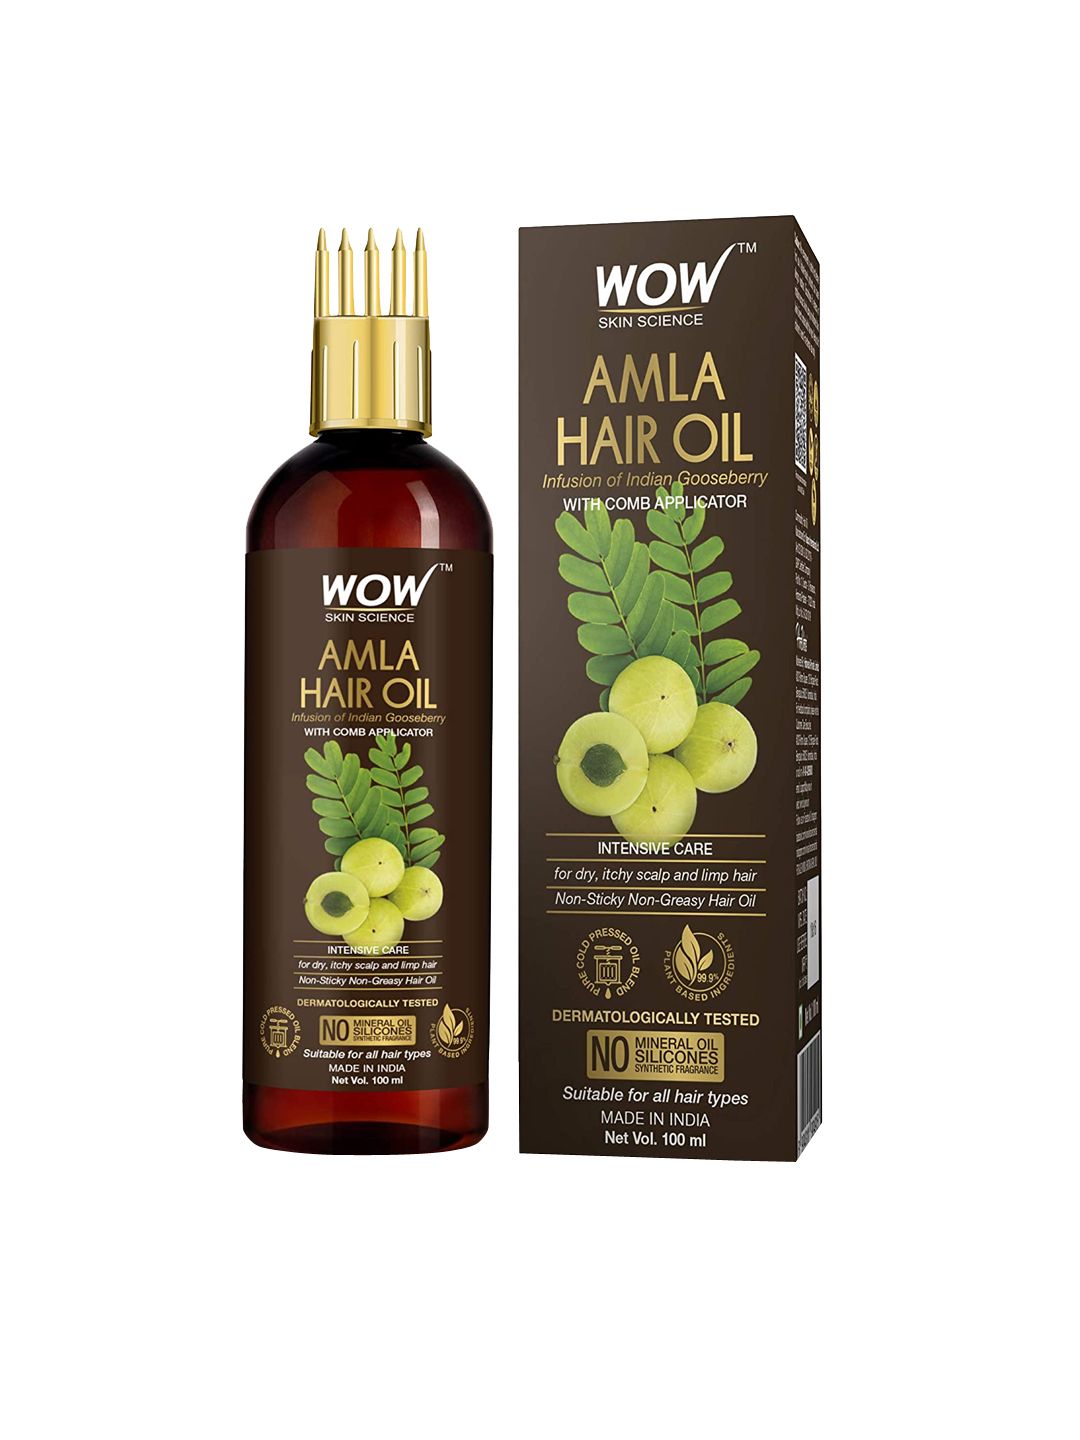 WOW SKIN SCIENCE Amla Hair Oil with Comb Applicator-100ml Price in India